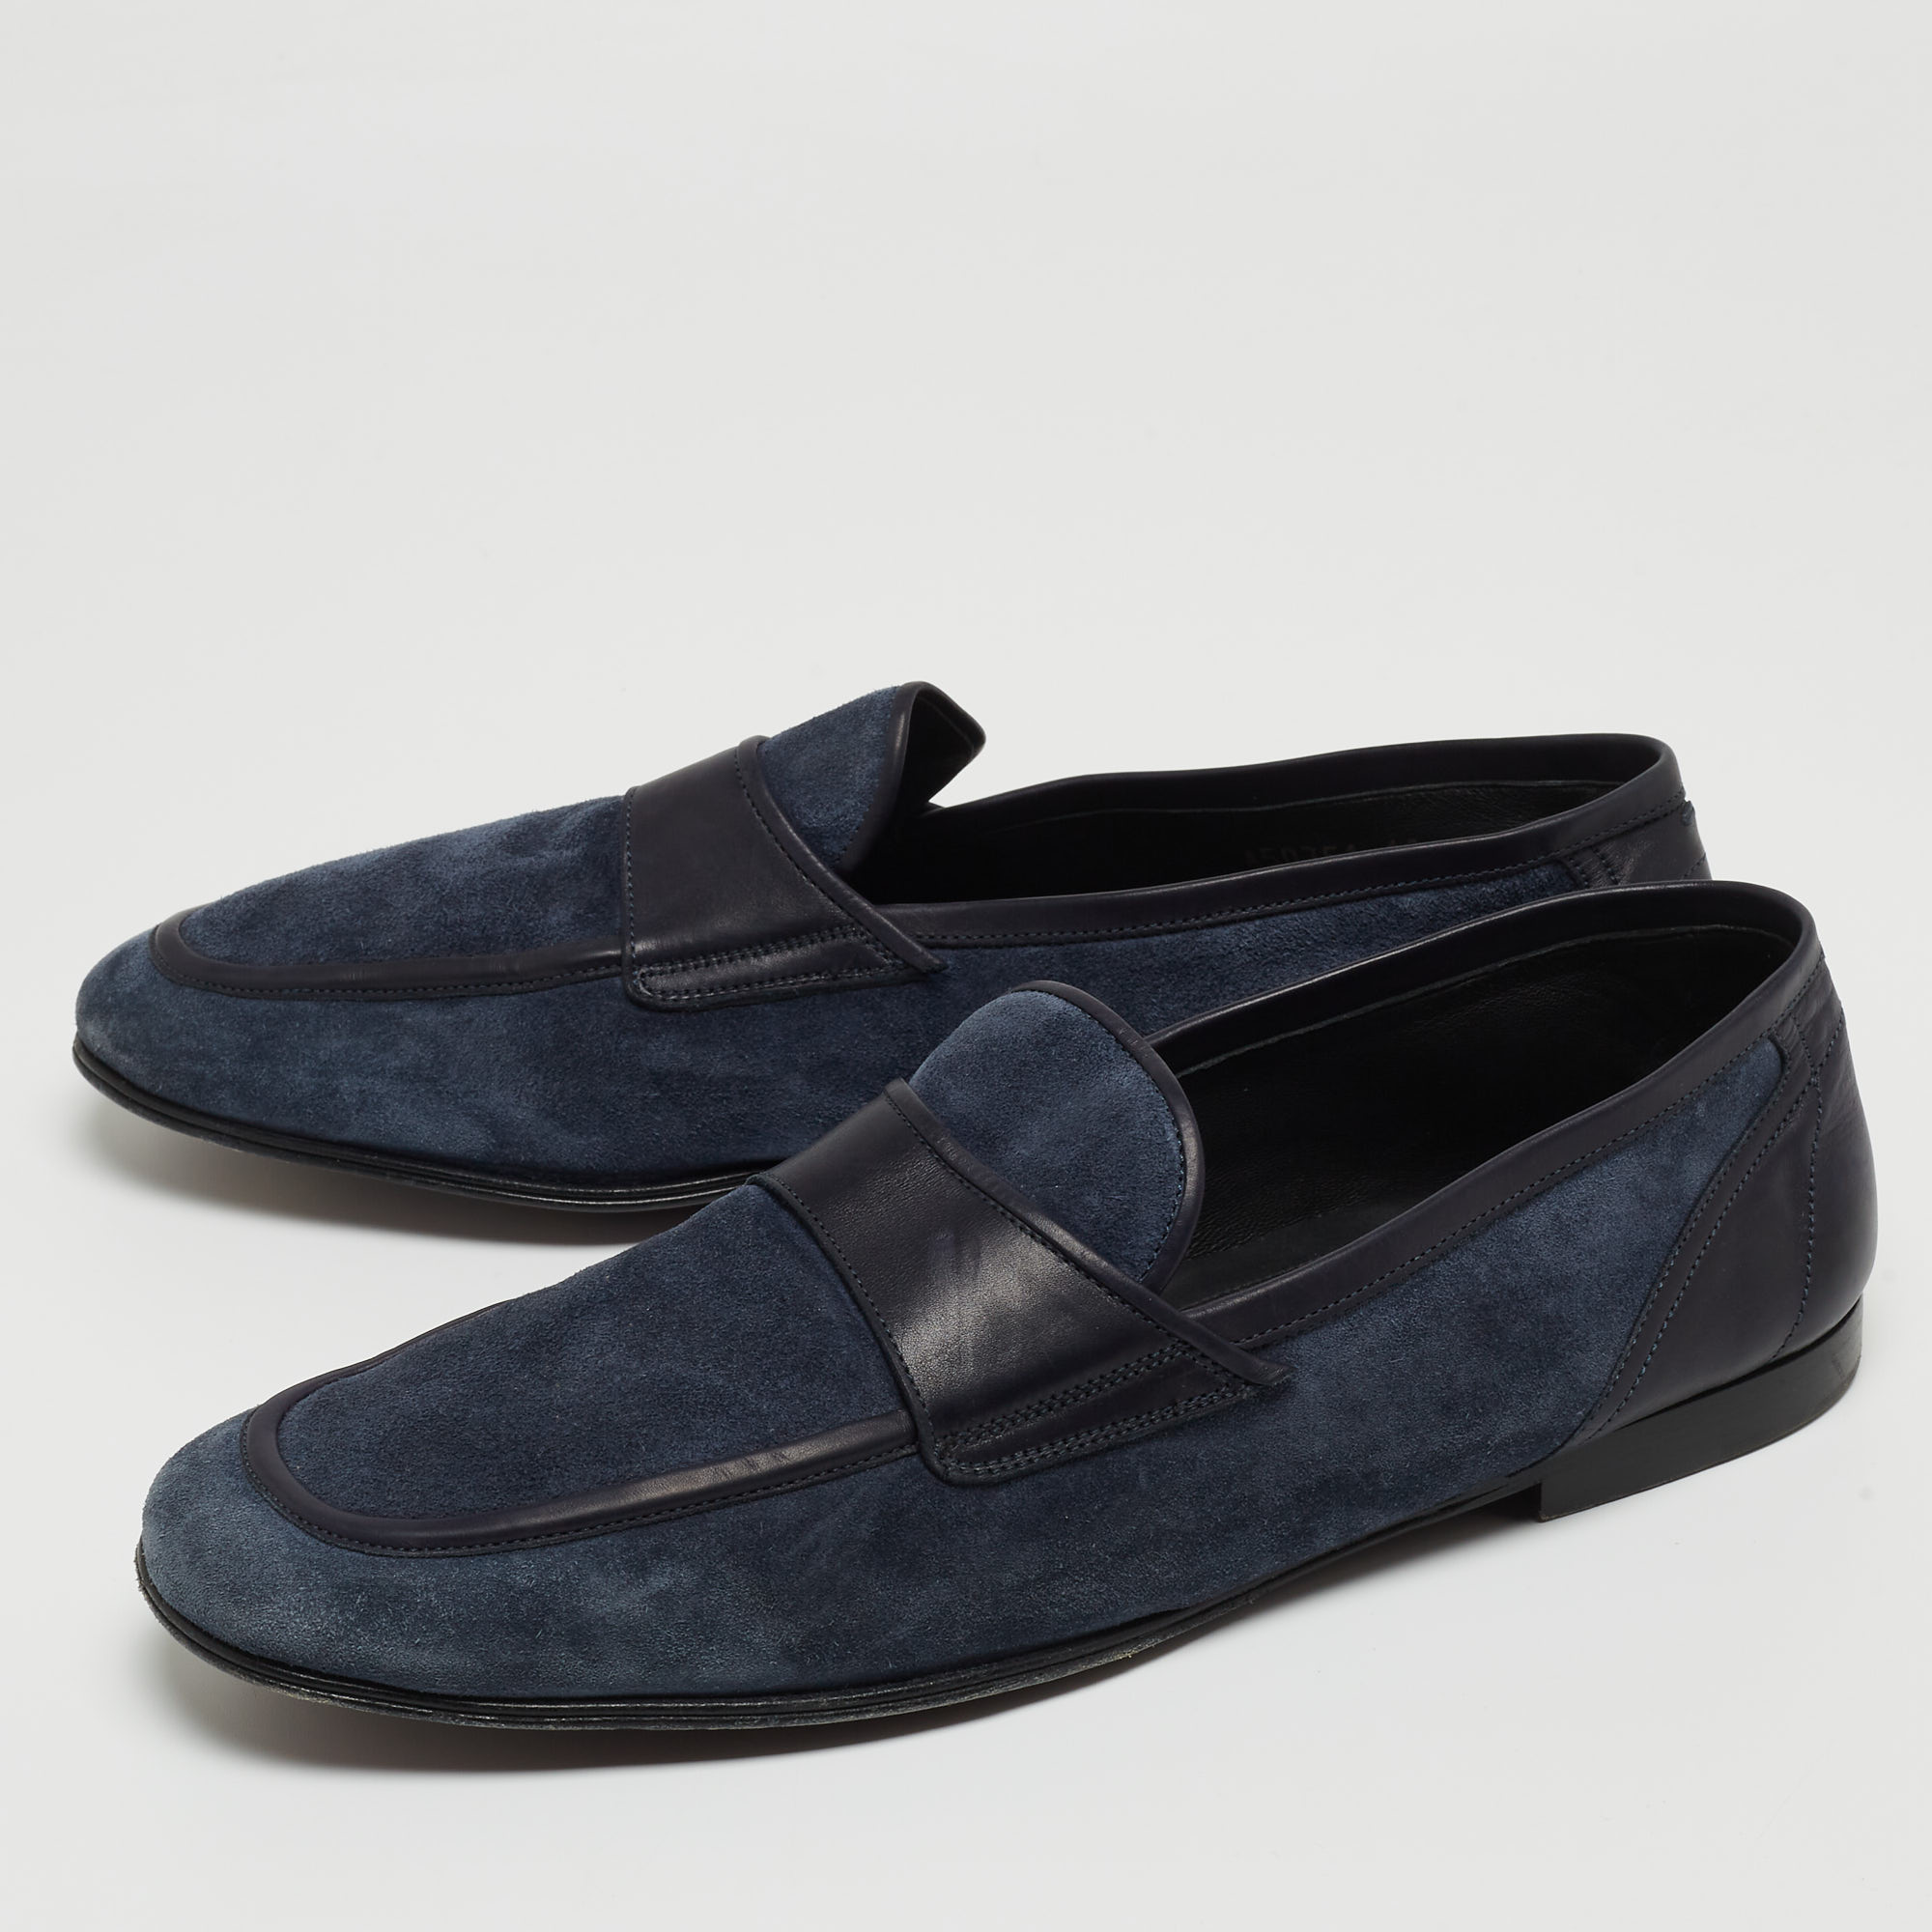 

Dolce & Gabbana Navy Blue Suede Slip On Loafers Size